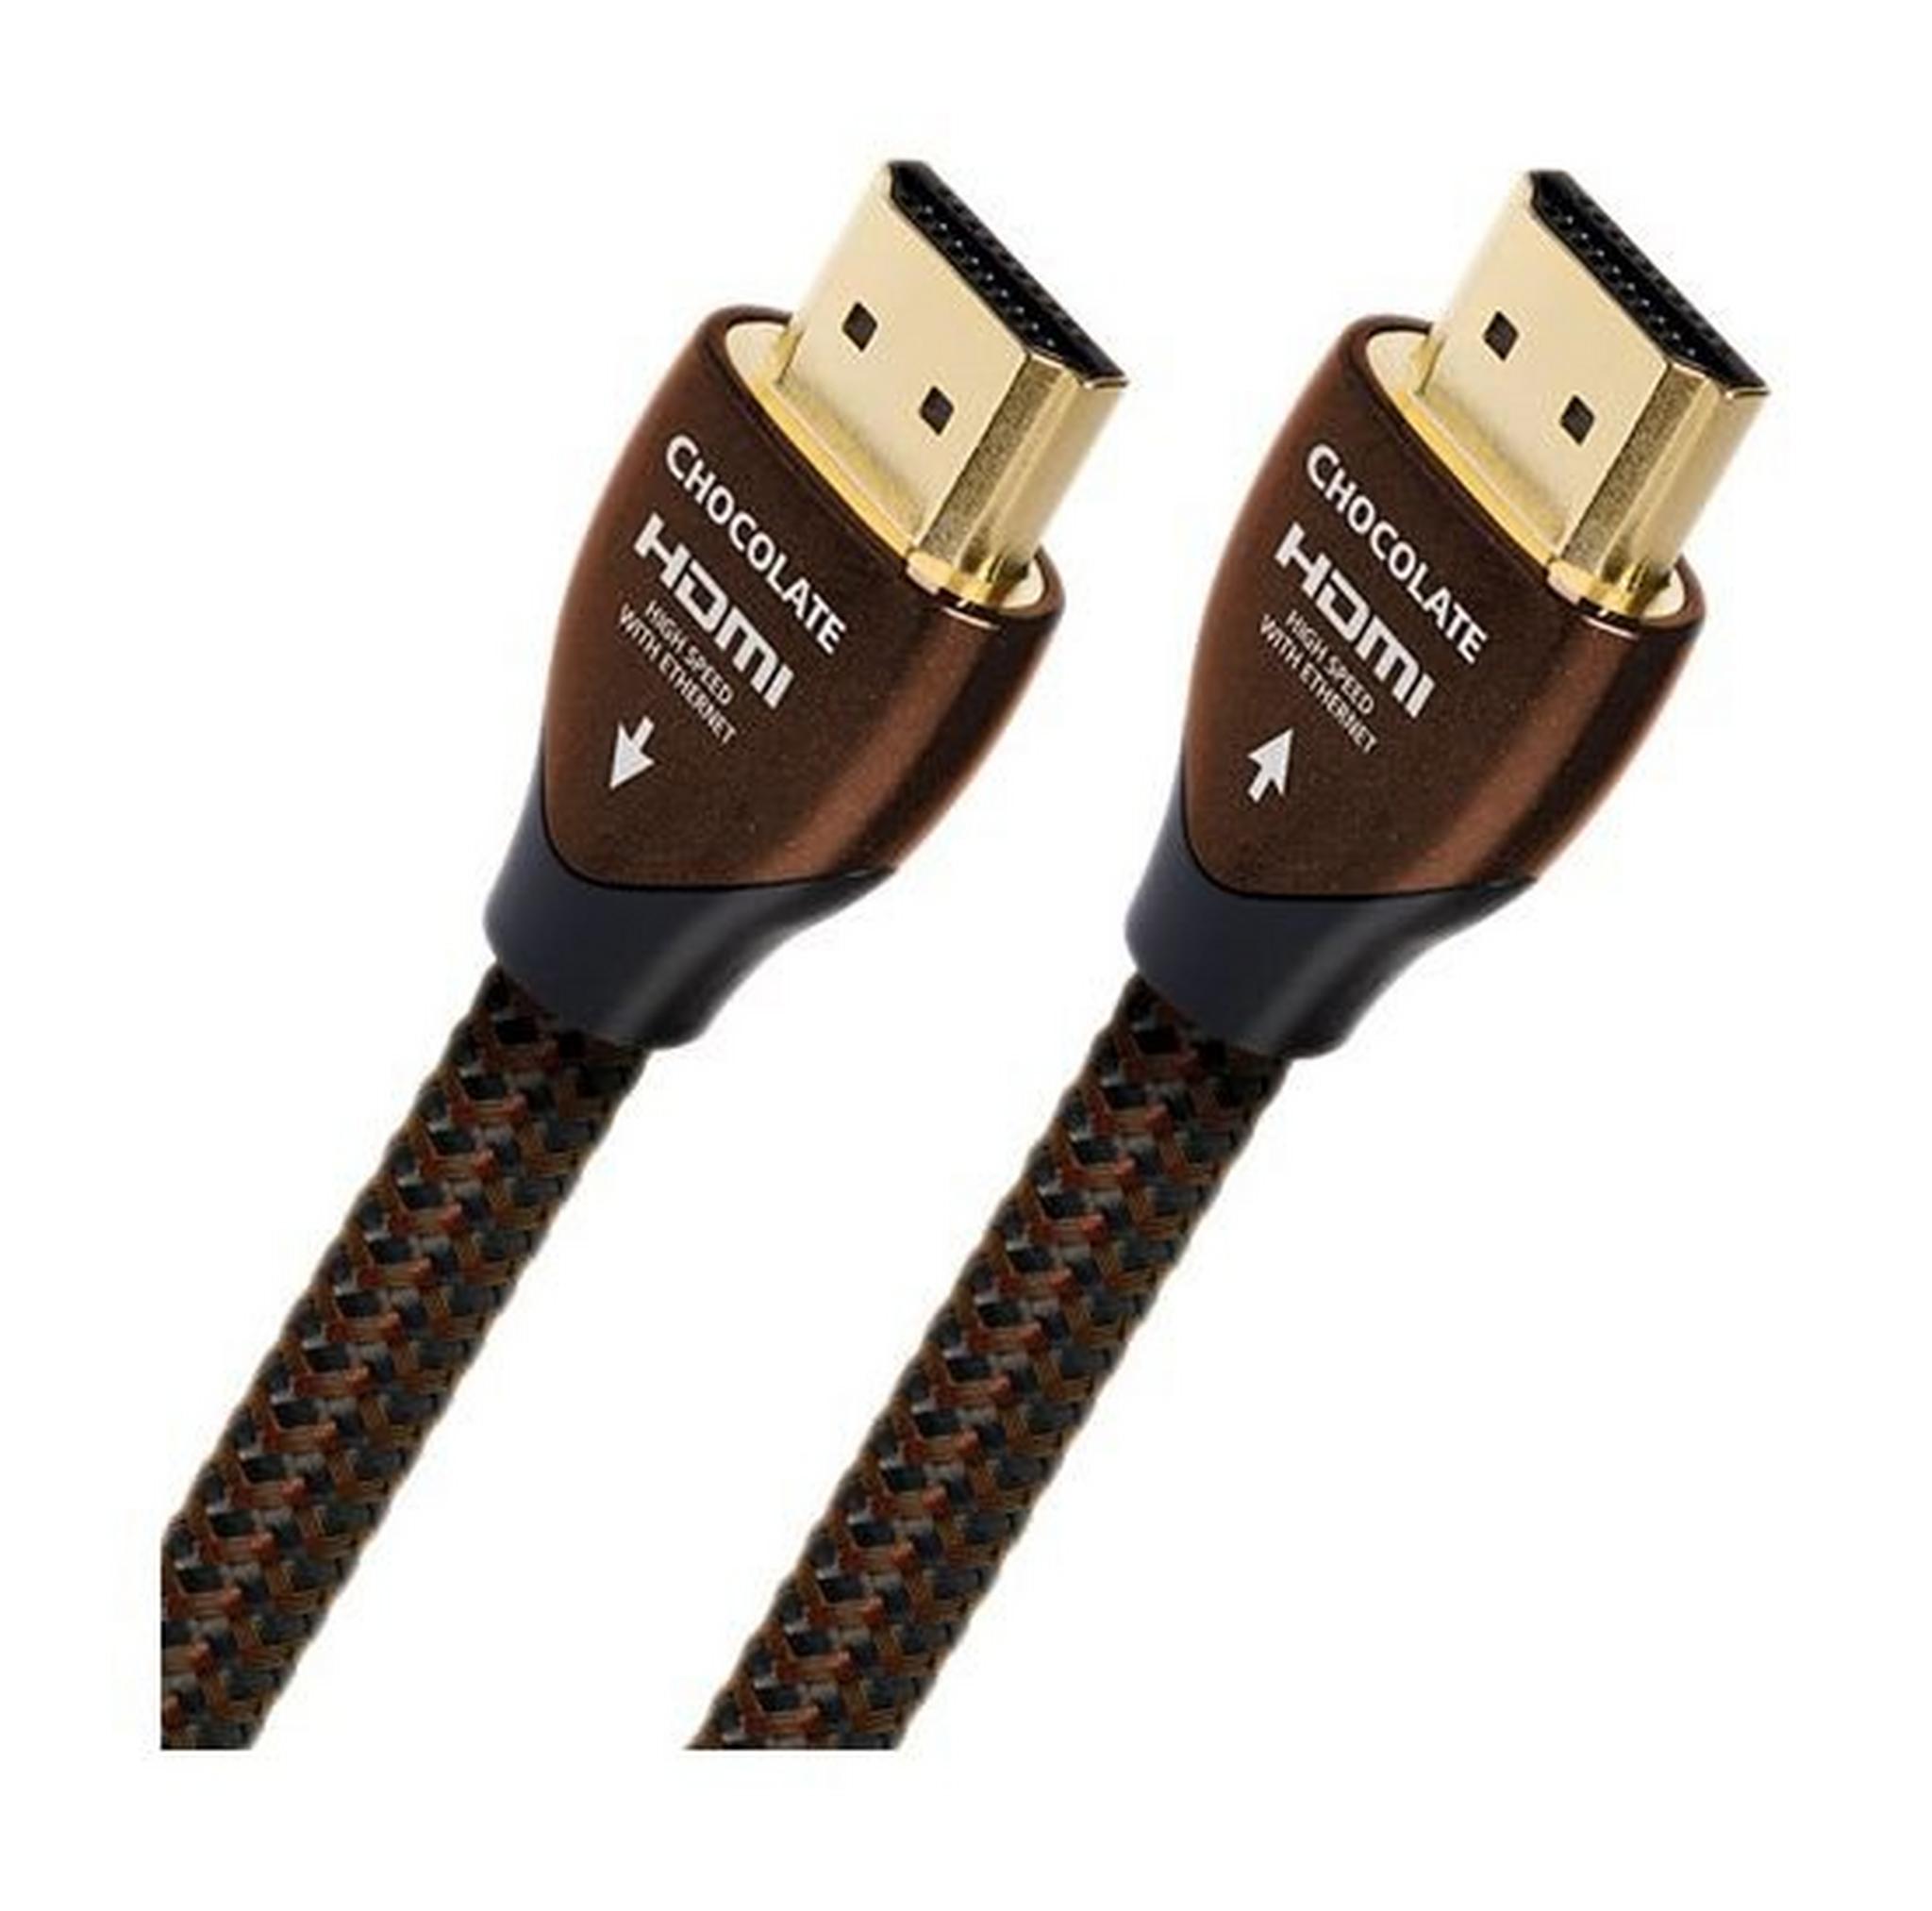 Audioquest Chocolate HDMI Cable 2m - Brown